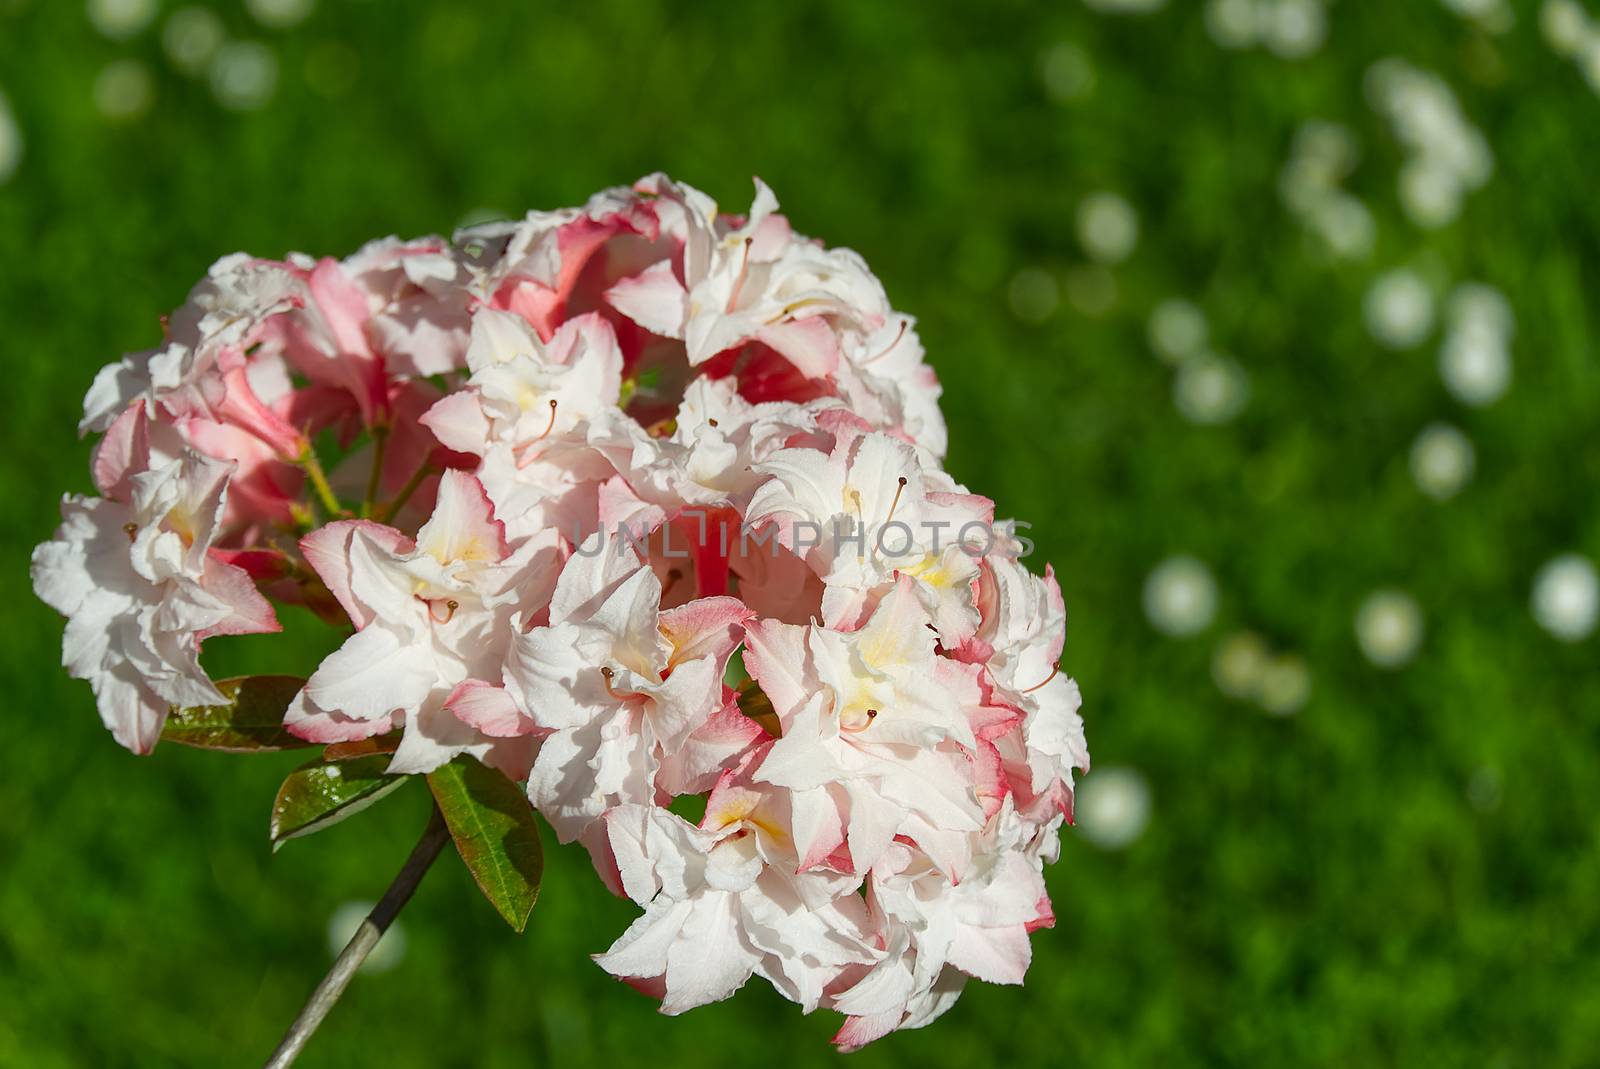 White, soft pink rhododendron flowers in summer park, blurry green leaves, natural organic background. by PhotoTime